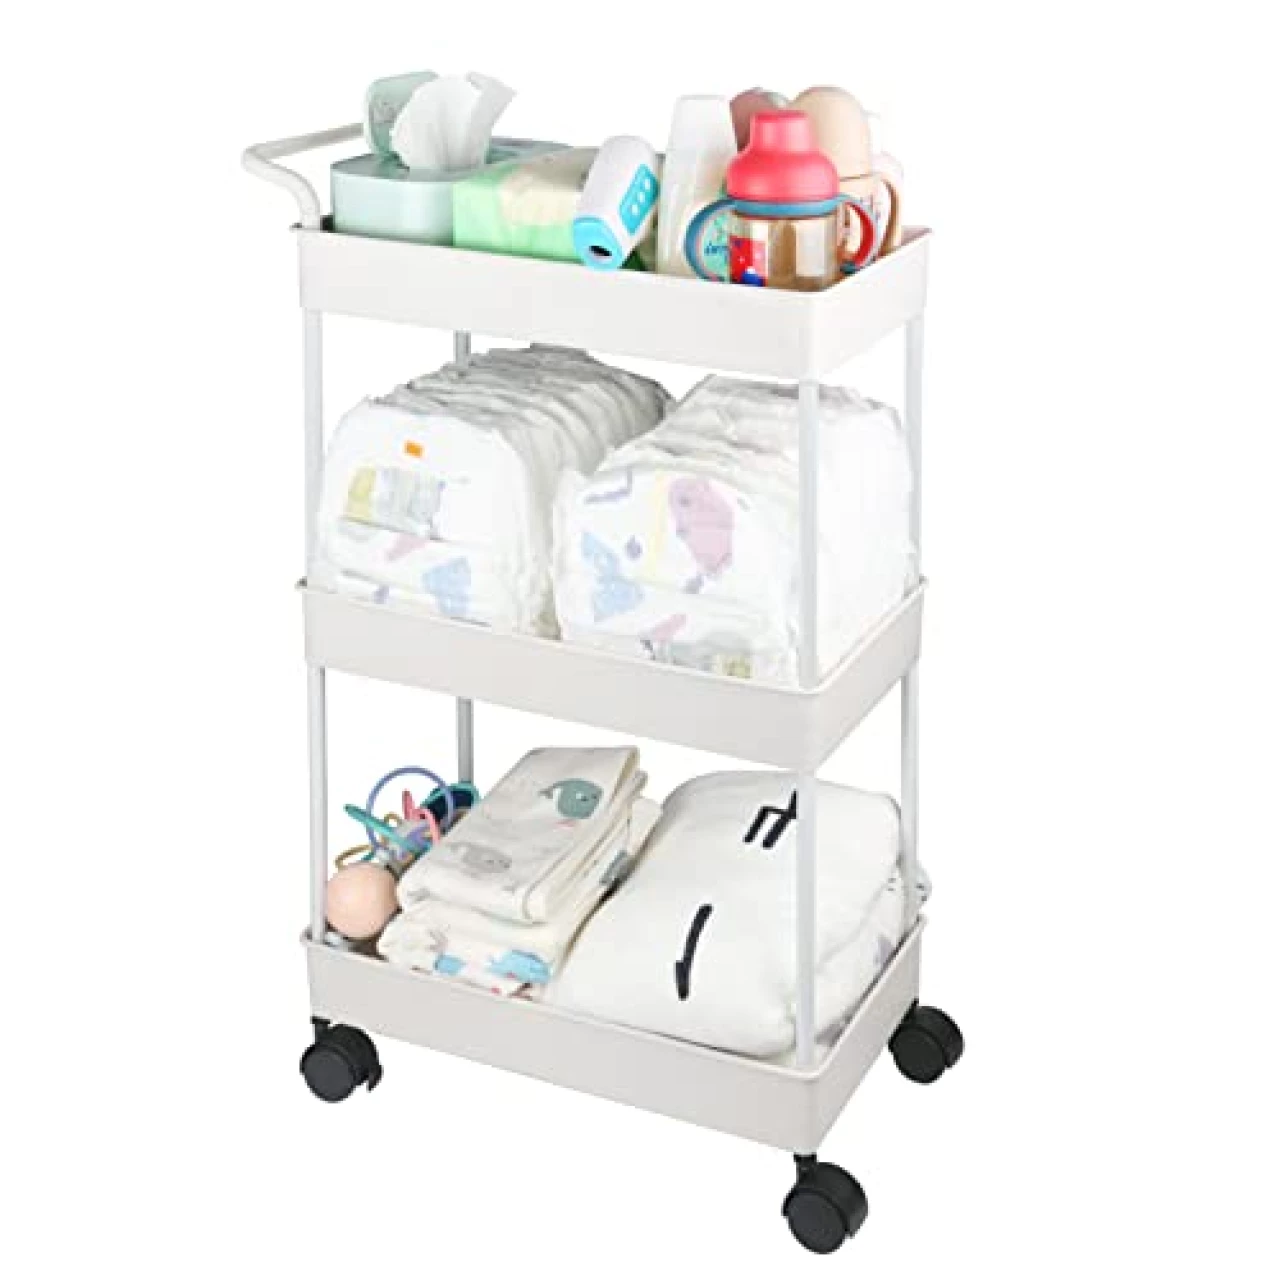 Volnamal Baby Diaper Caddy, Plastic Movable Cart for Newborn Nursery Essentials Diaper Storage Caddy Organizer for Changing Table &amp; Crib, Easy to Assemble, Beige